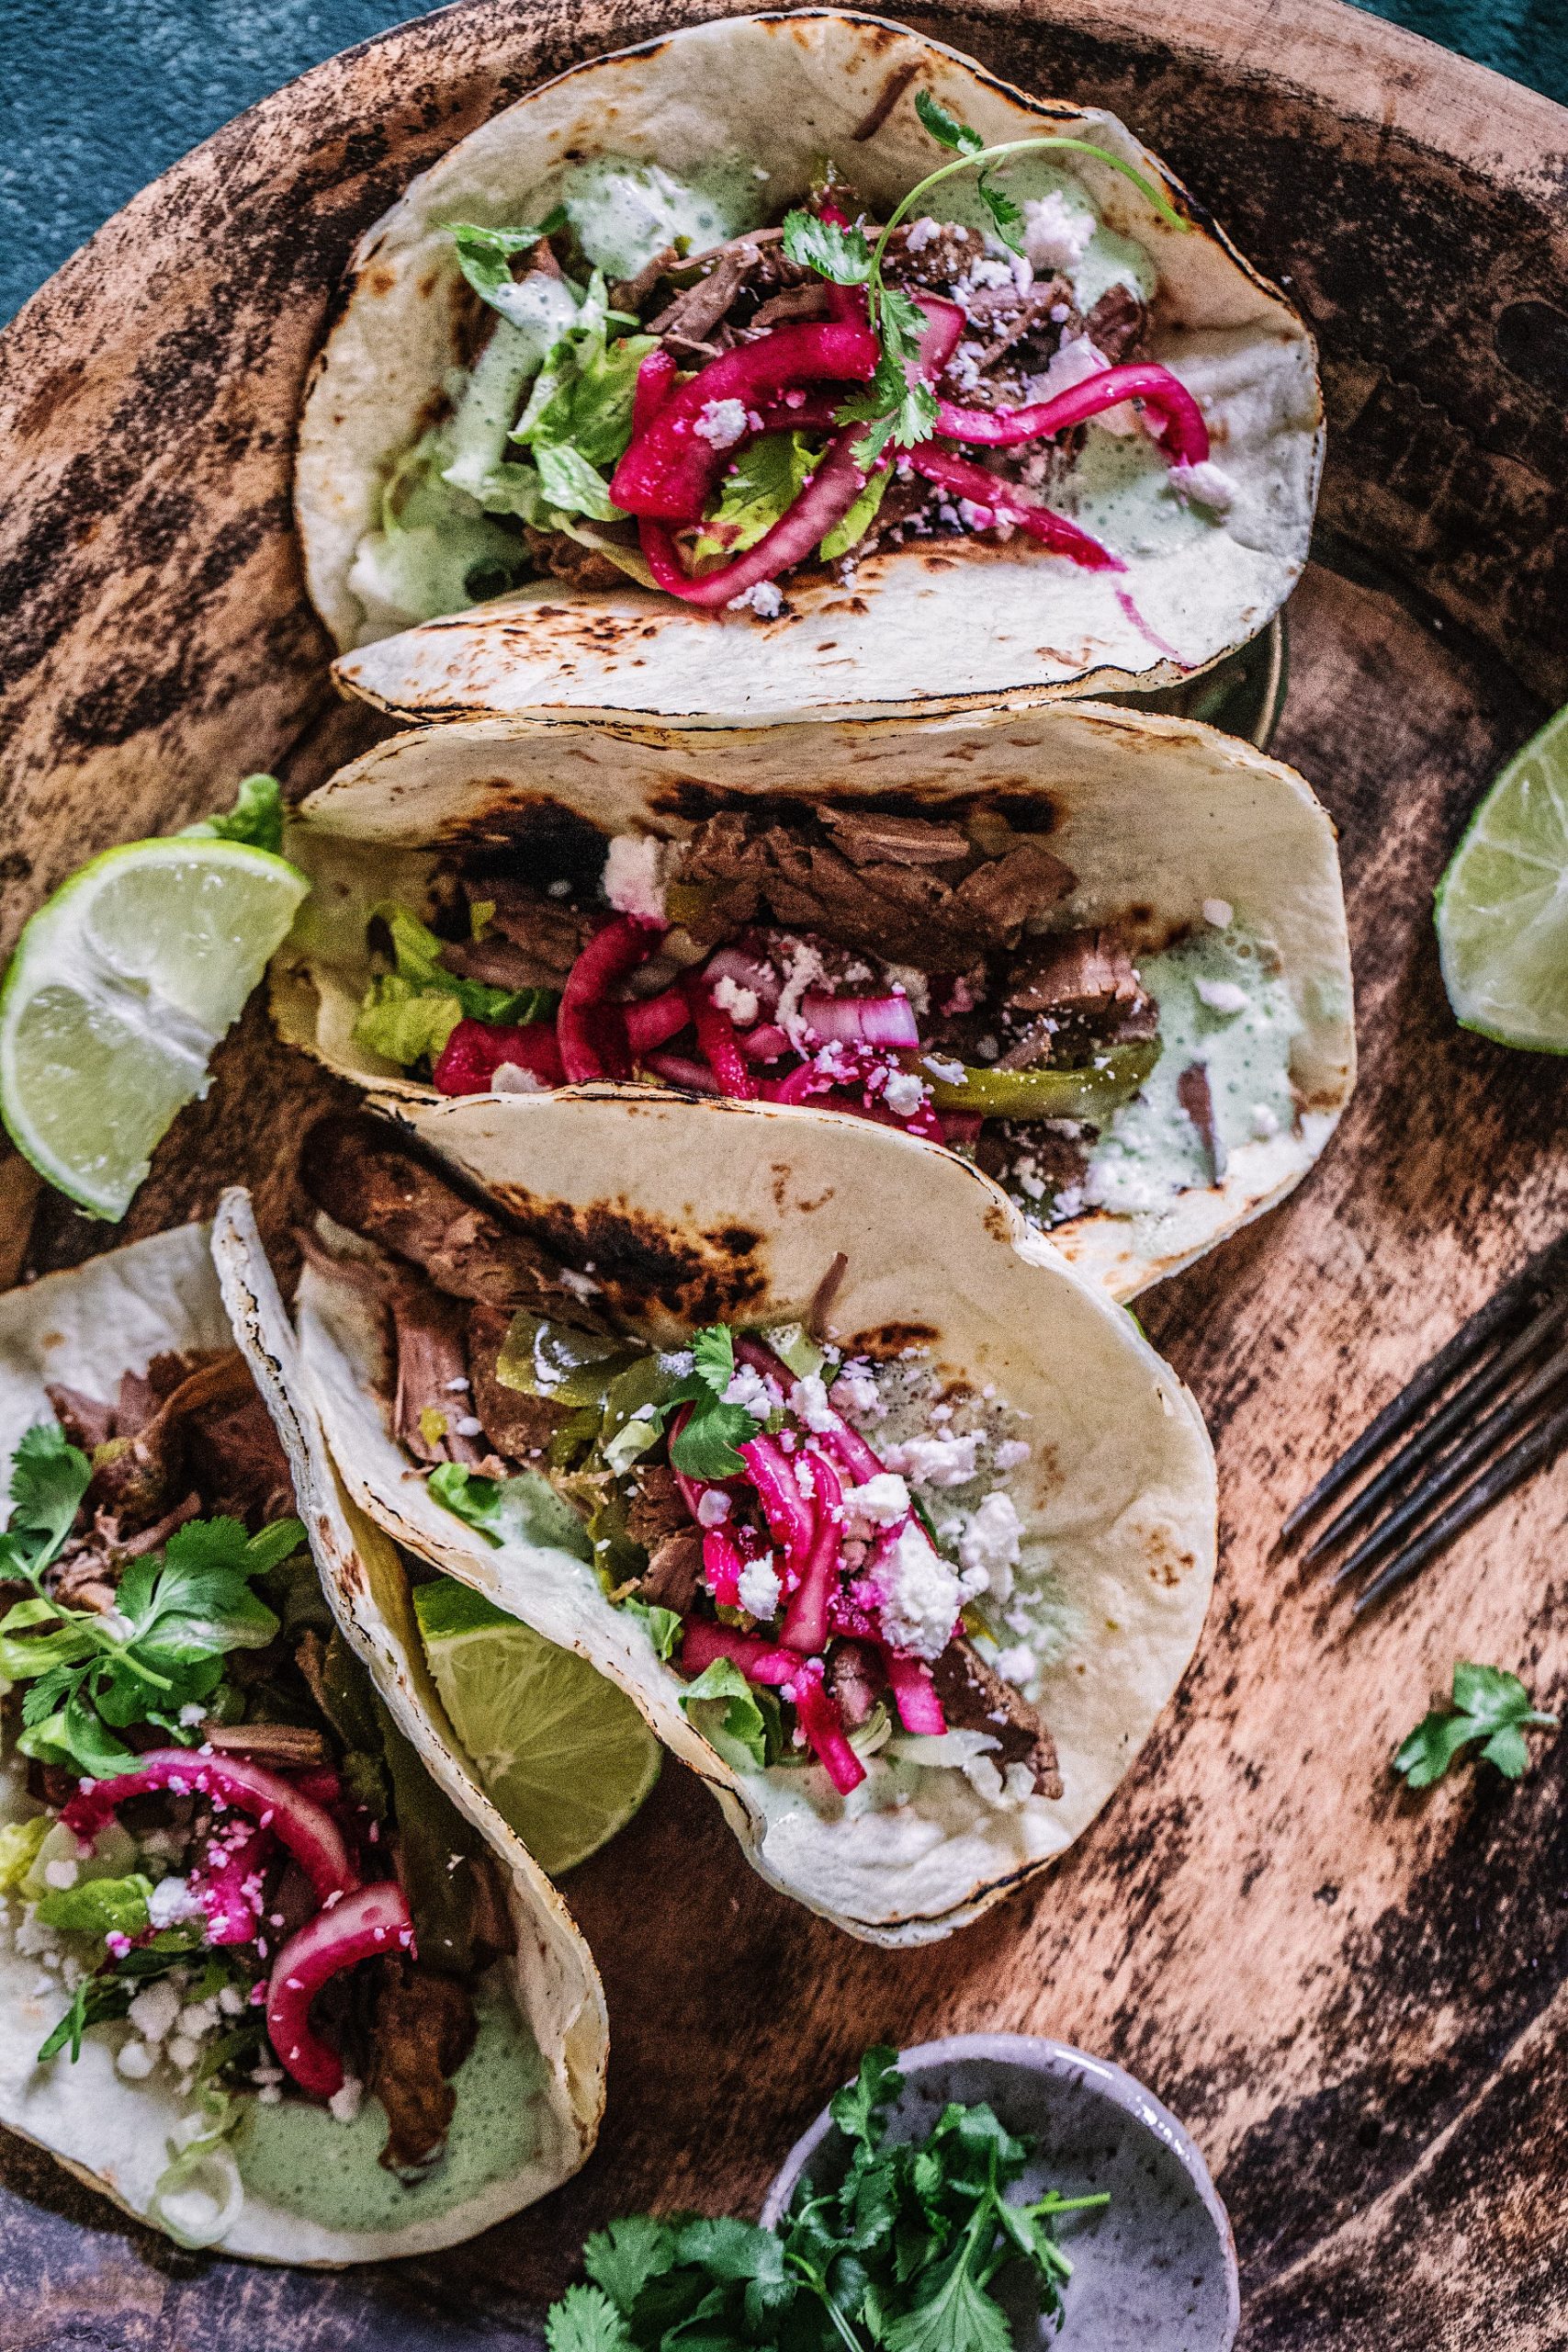 New! Slow Cooker Carne Asada Tacos with Cilantro-Lime Cream